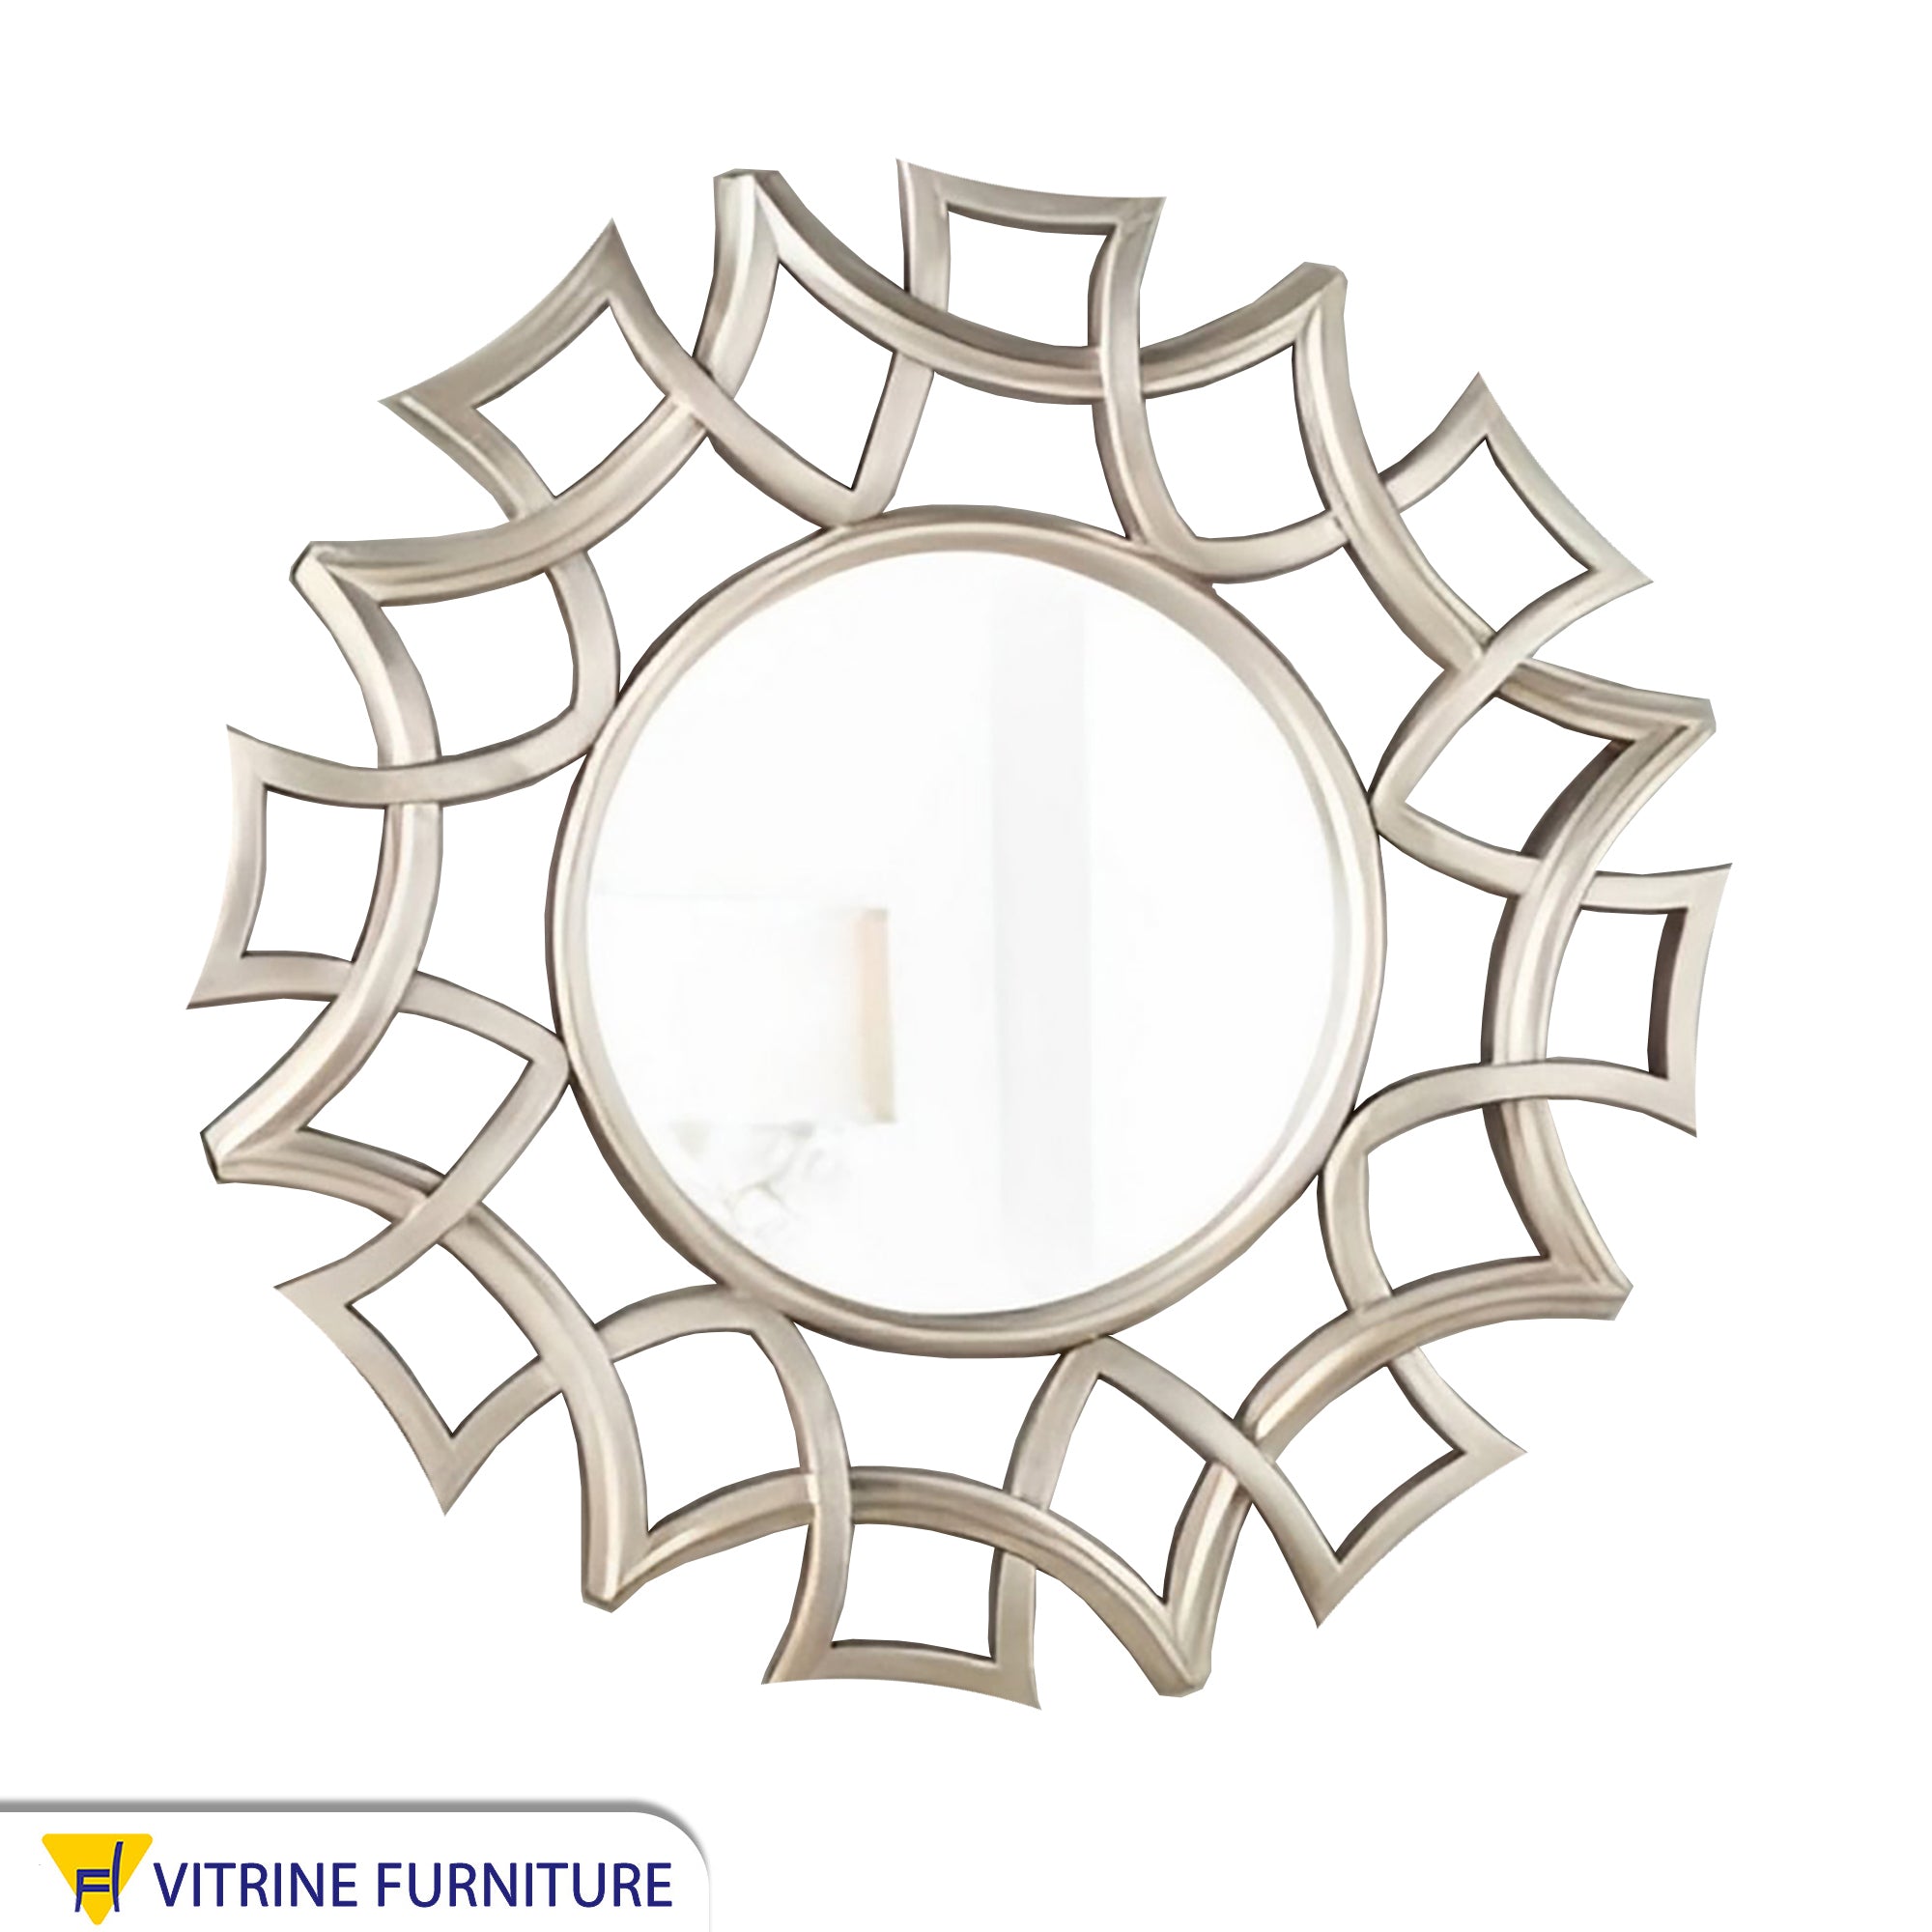 A circular mirror with a frame of hollow overlapping circles